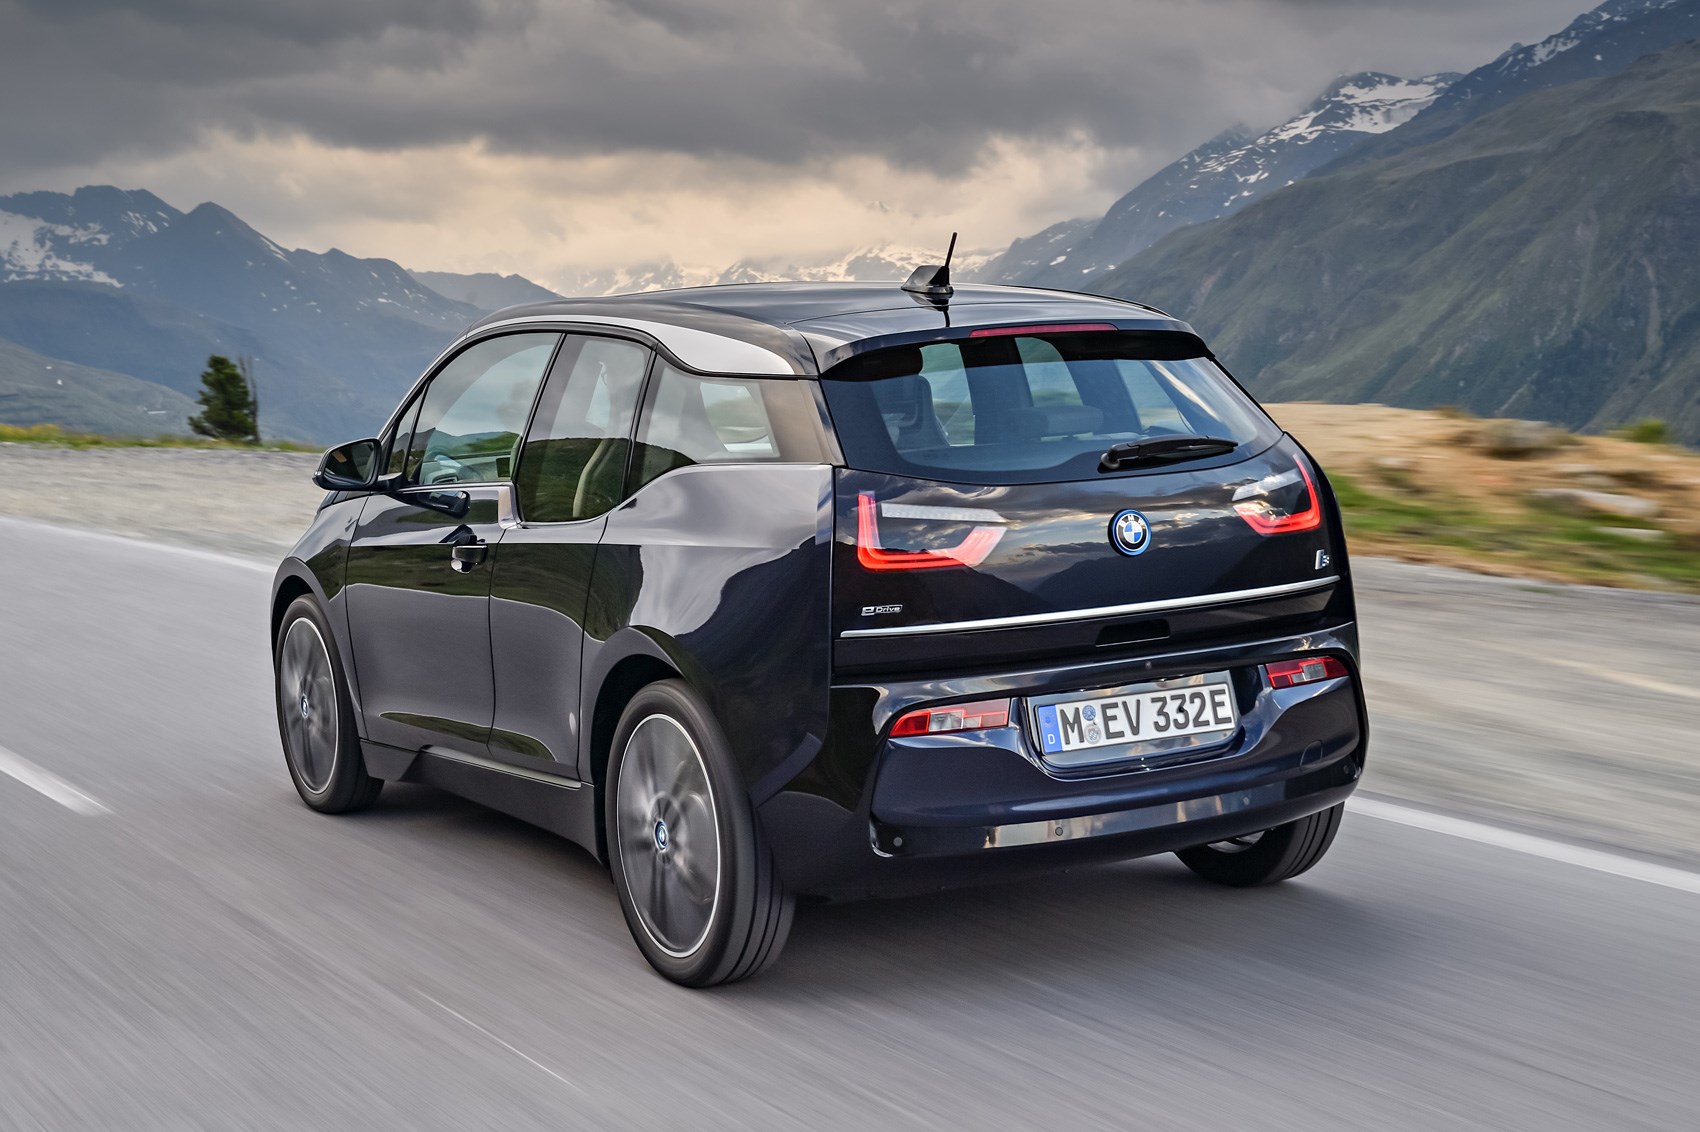 2018 BMW i3s first drive review: sportier and nearly as efficient